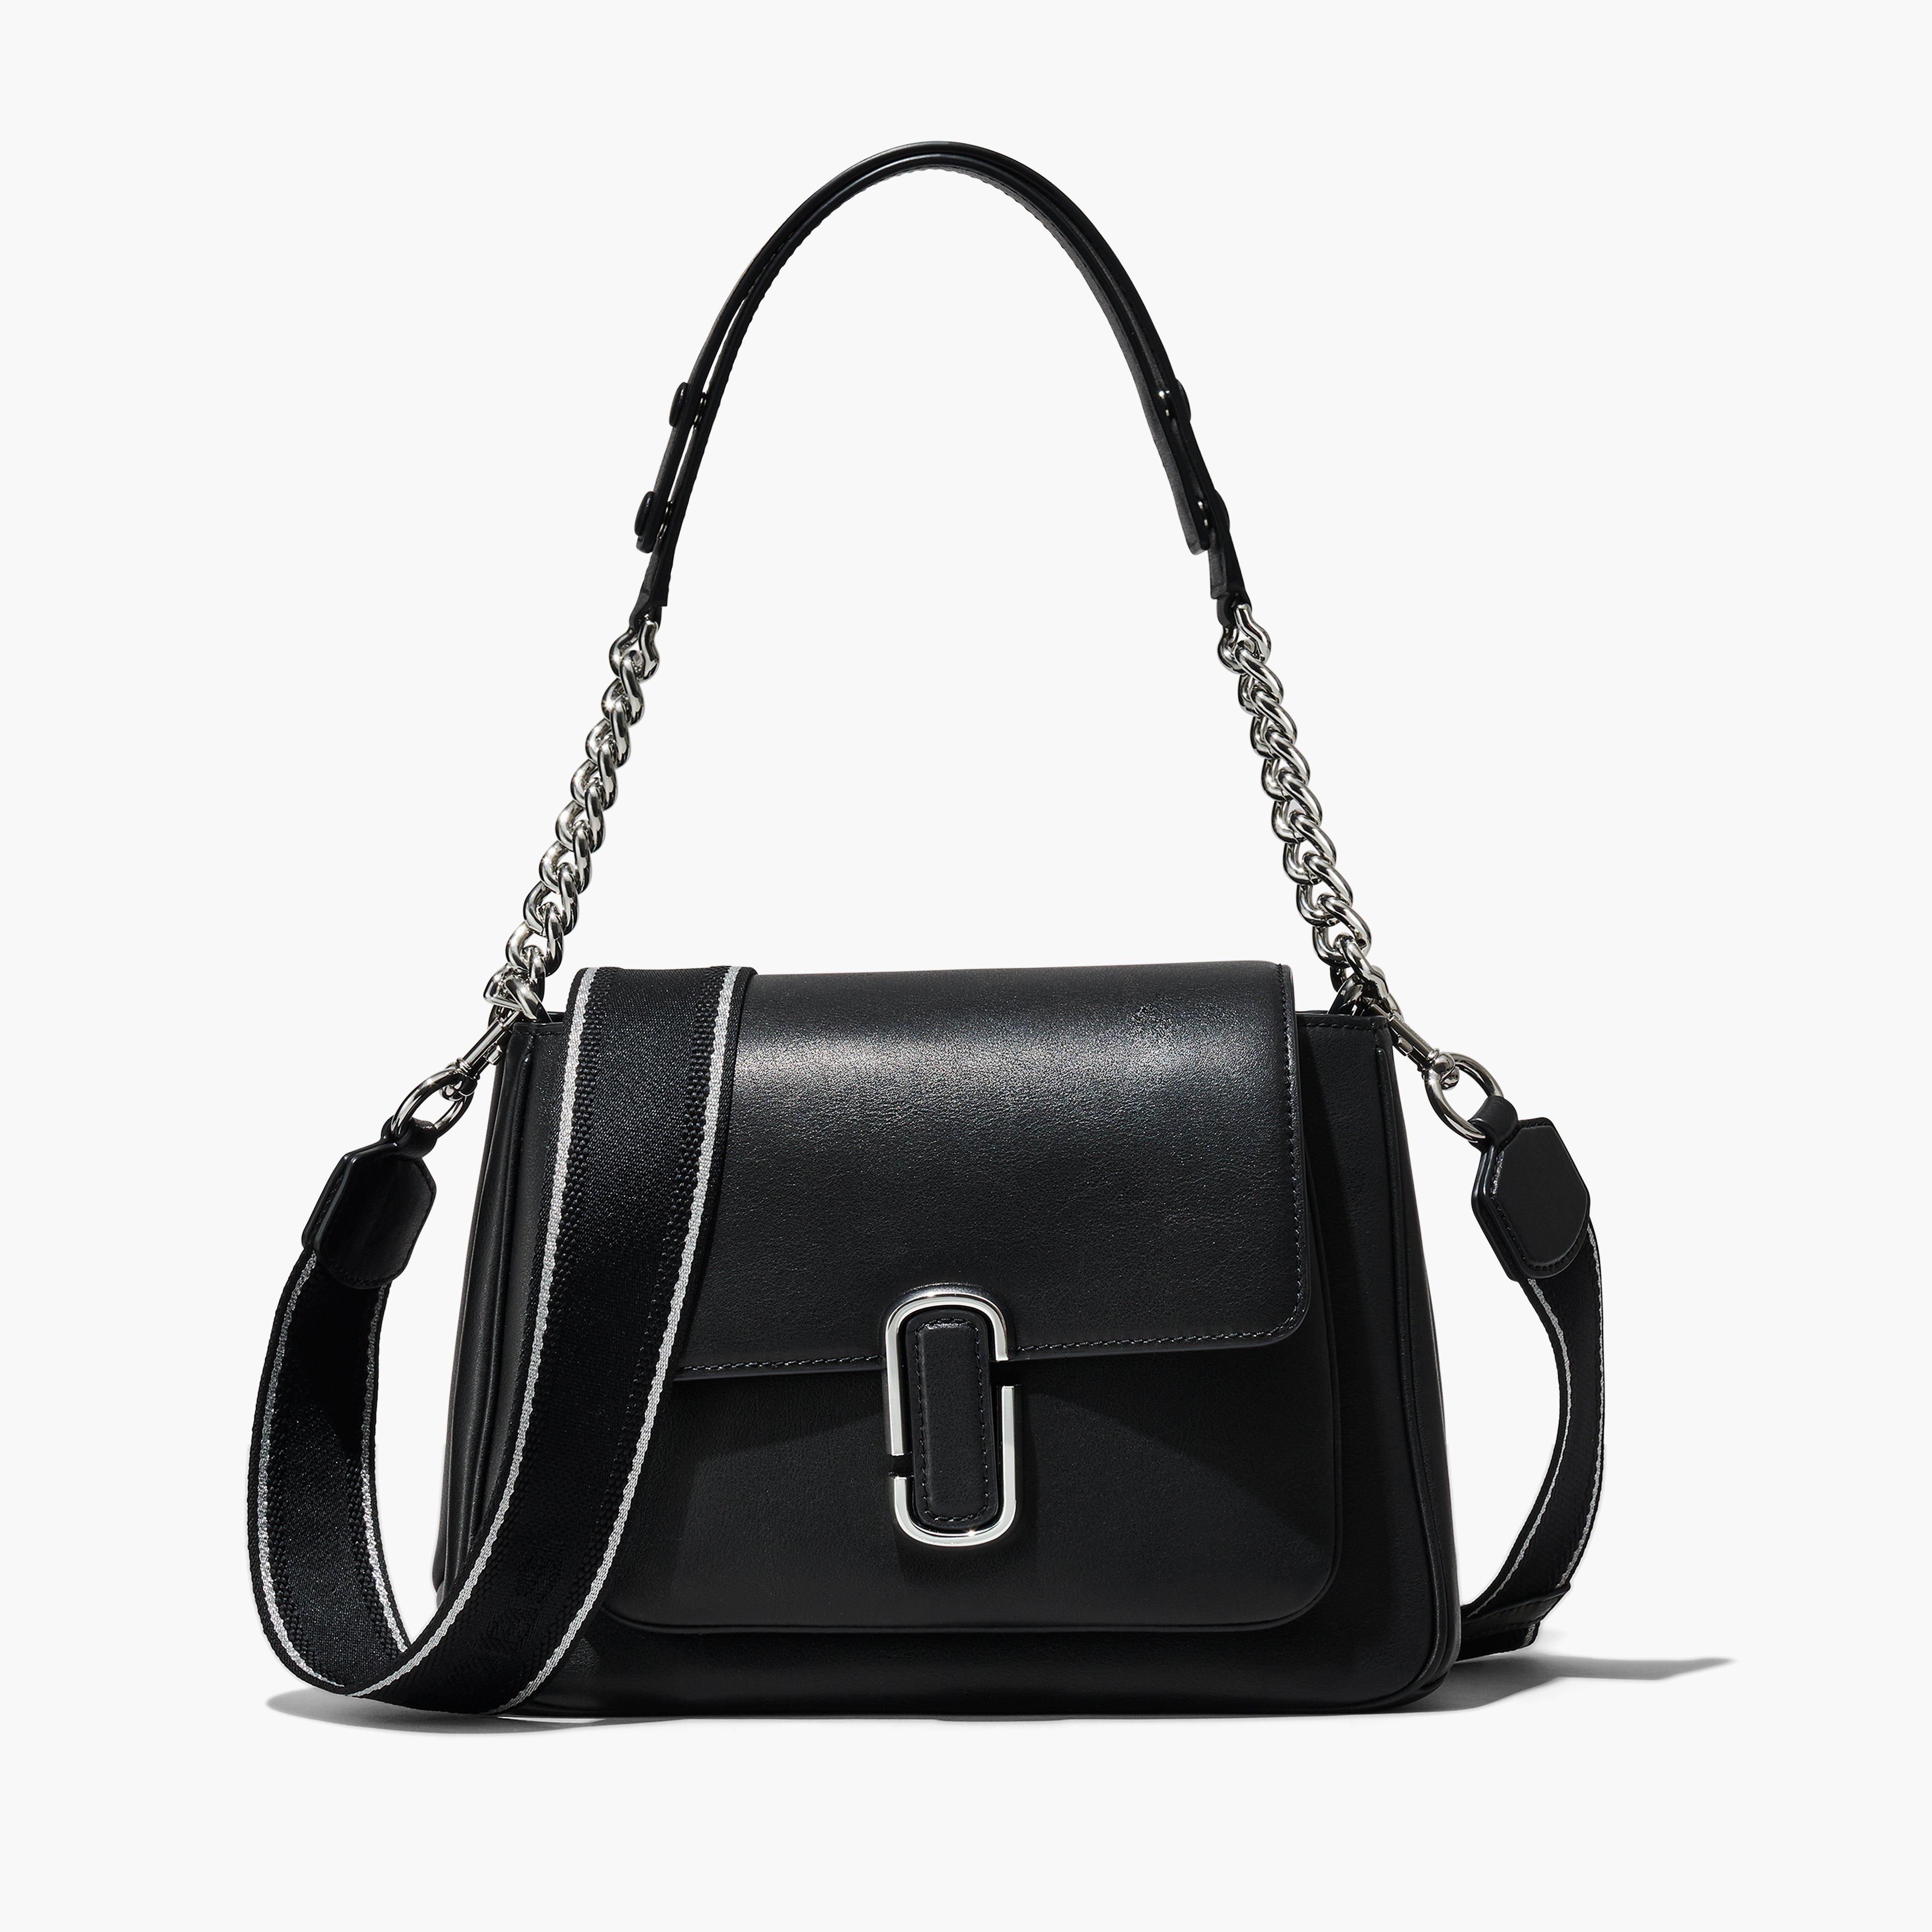 Marc Jacobs The J Marc Chain Satchel Bag in Black | Lyst